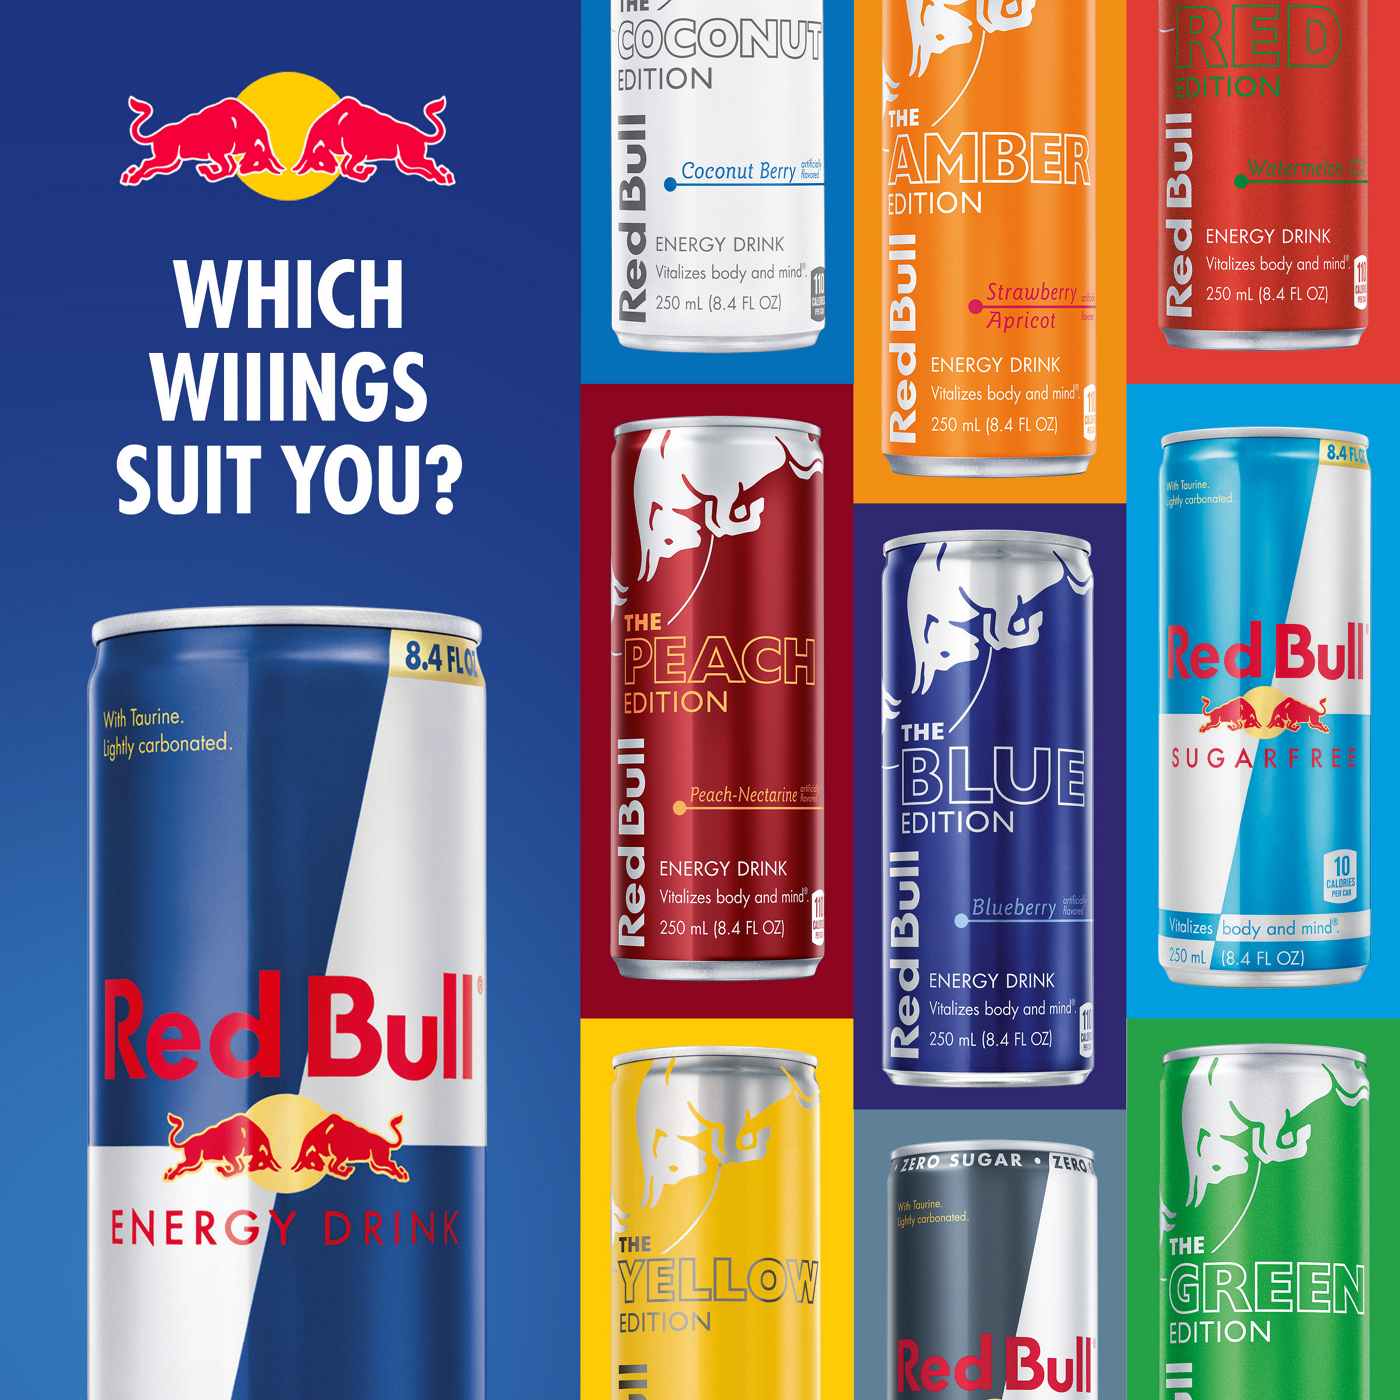 Red Bull Energy Drink; image 6 of 7